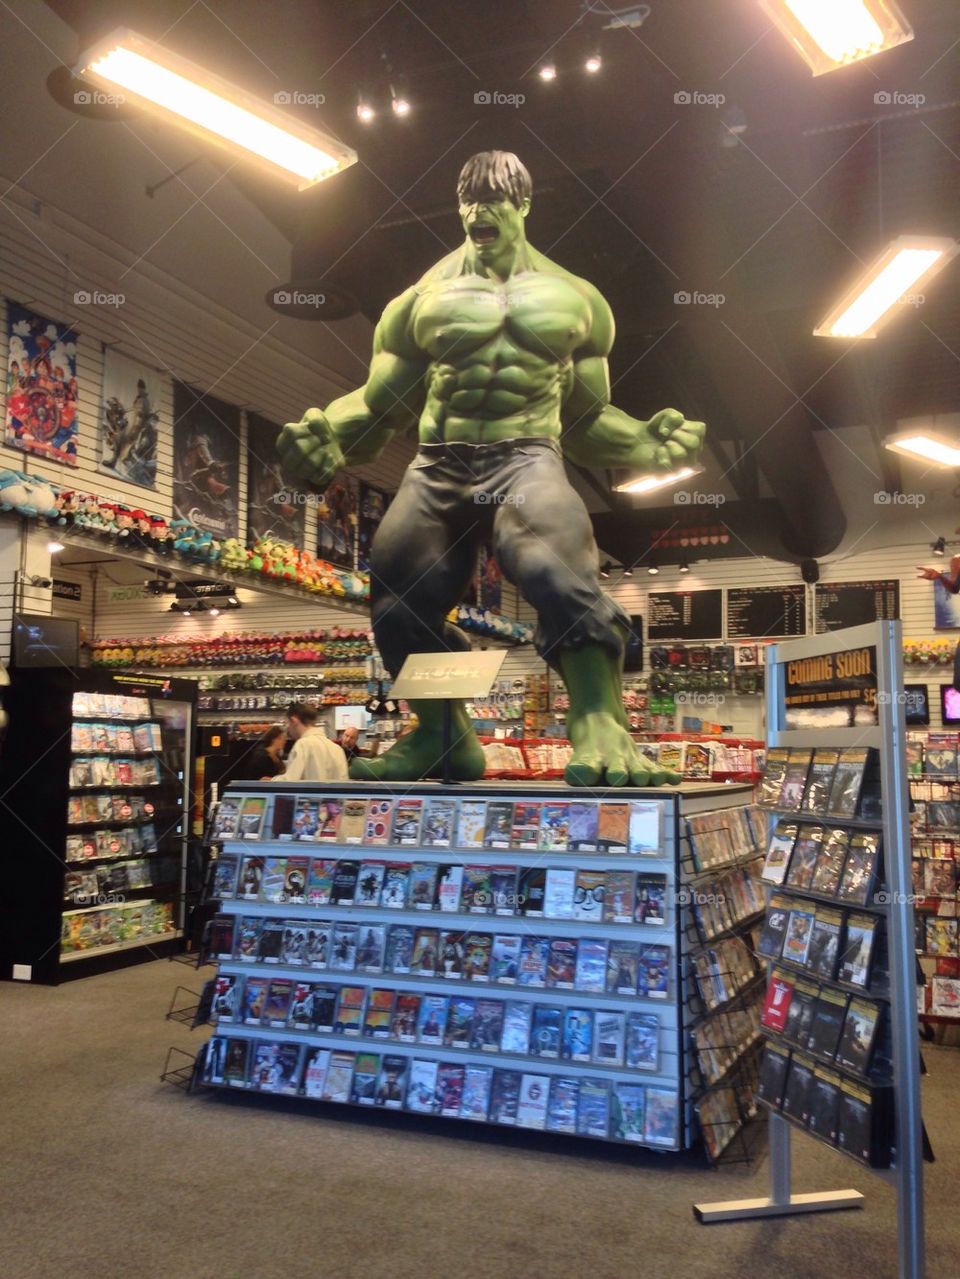 Game store